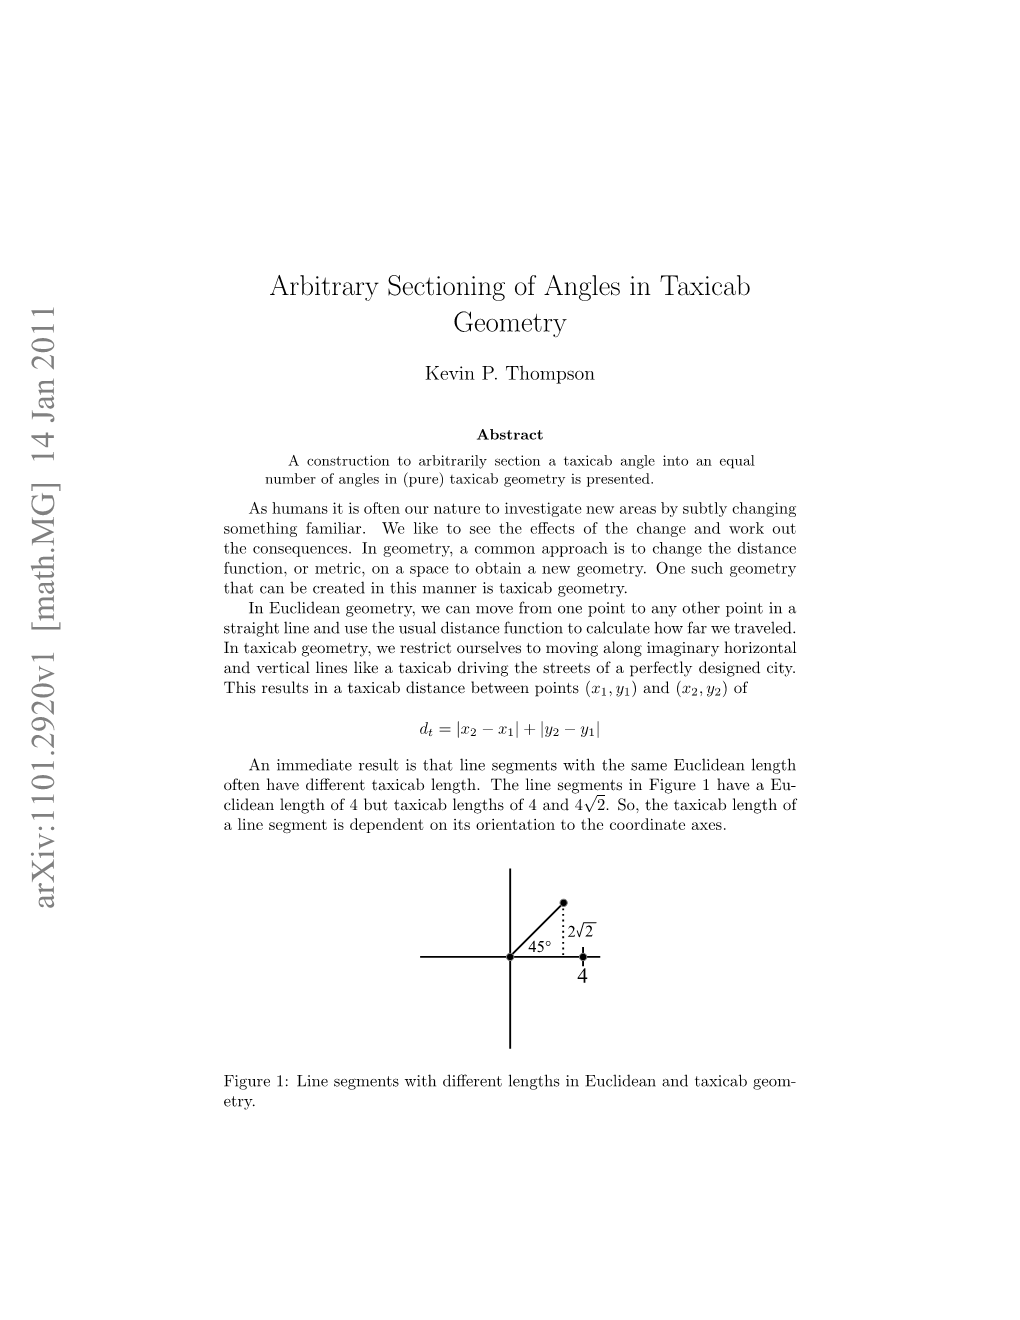 Arbitrary Sectioning of Angles in Taxicab Geometry